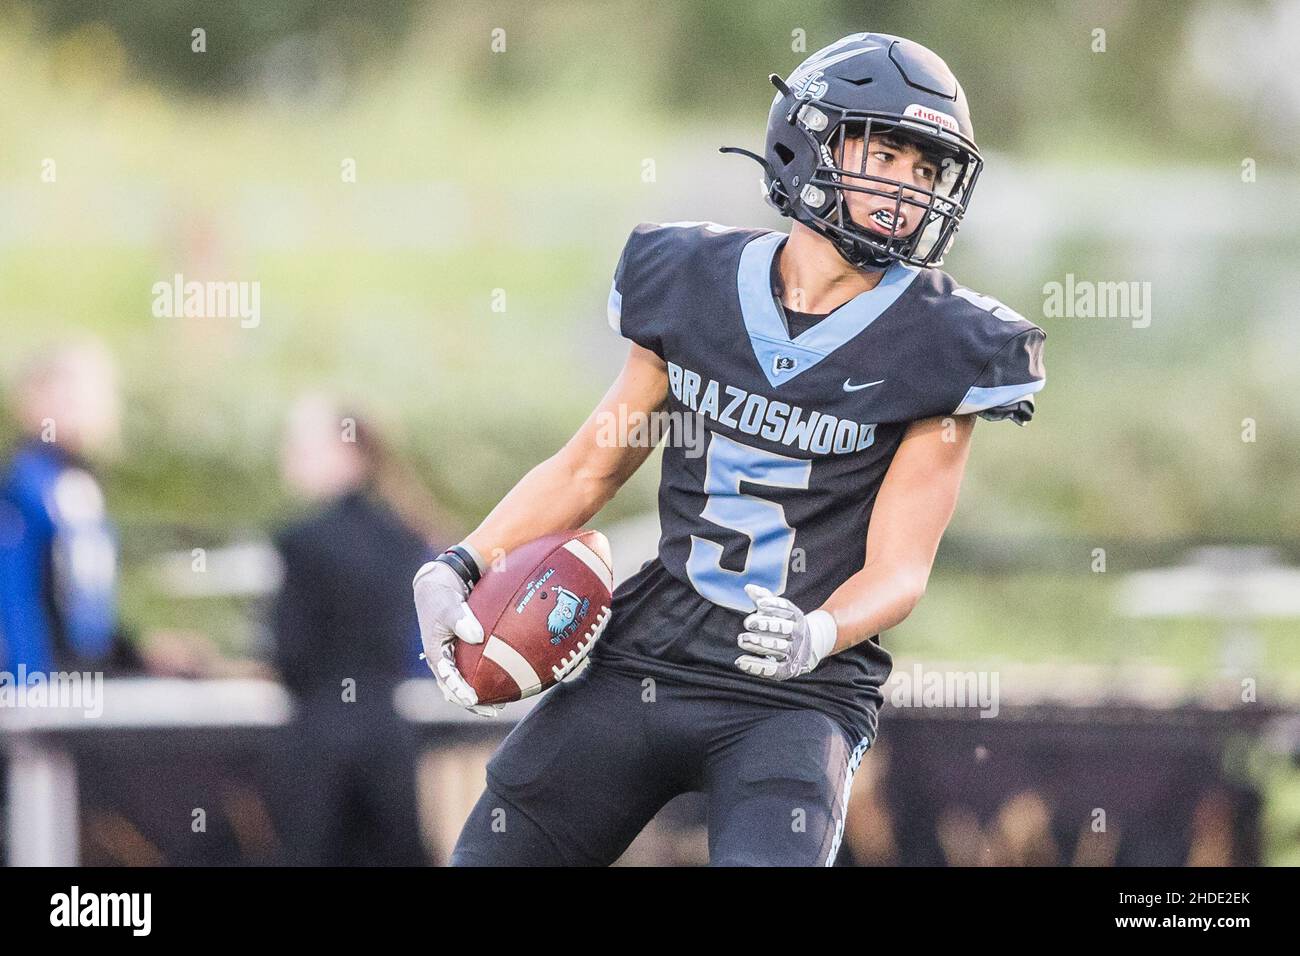 August 27, 2021: Brazoswood's Cole Hagan (5) scores a touchdown after catching a pass in a Texas University Interscholastic League (UIL) high school football game between the Santa Fe Indians and the Brazoswood Buccaneers at Hopper Field in Freeport, Texas. Prentice C. James via CSM Stock Photo